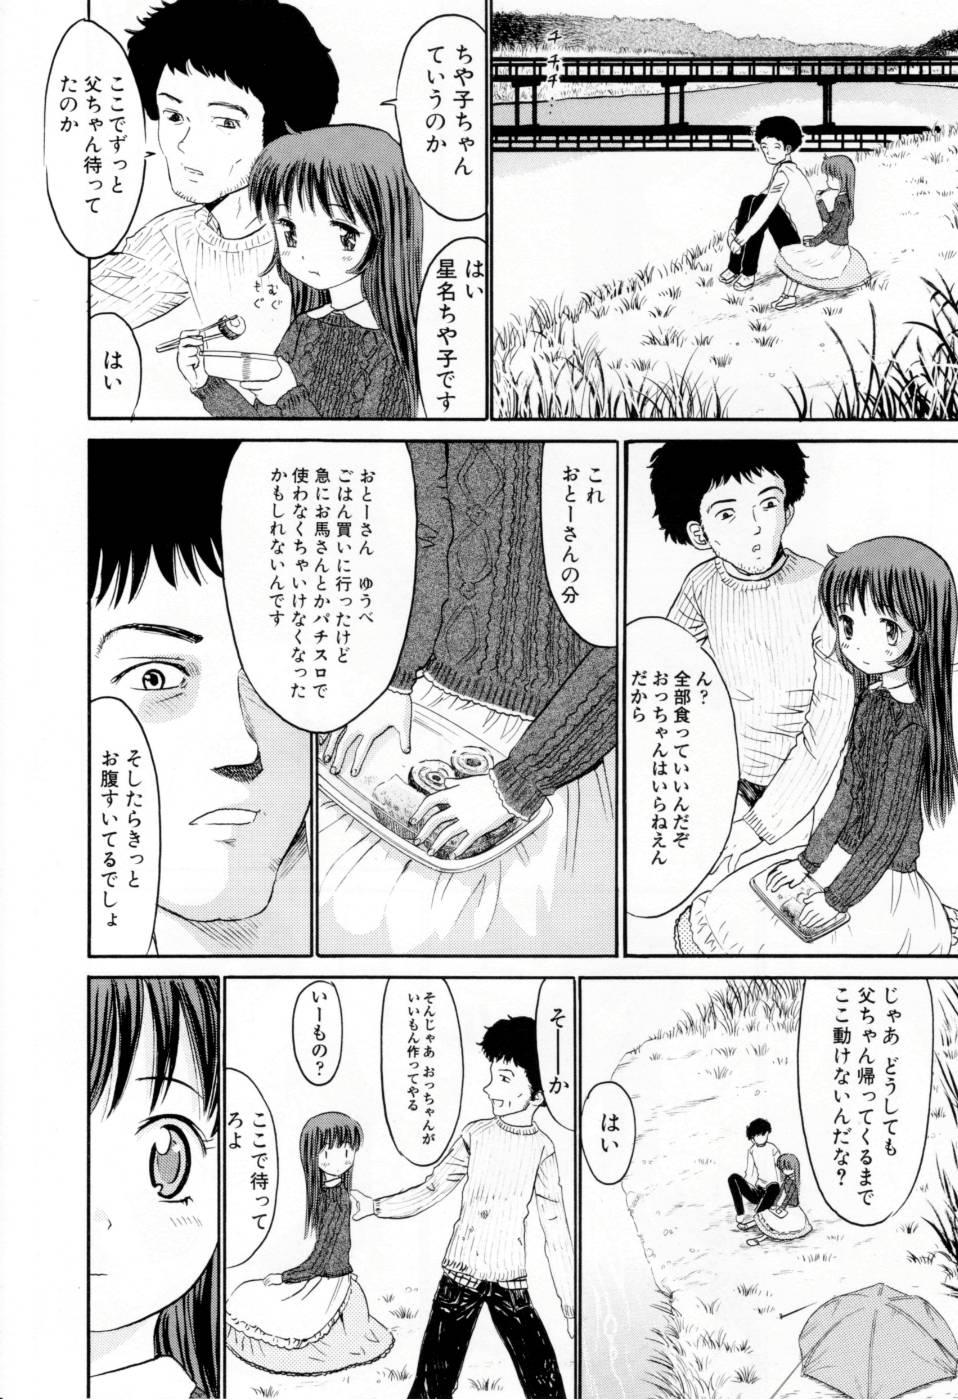 Hot Amakute Kiken na Kaerimichi - The road which returns is dangerous sweetly Africa - Page 11